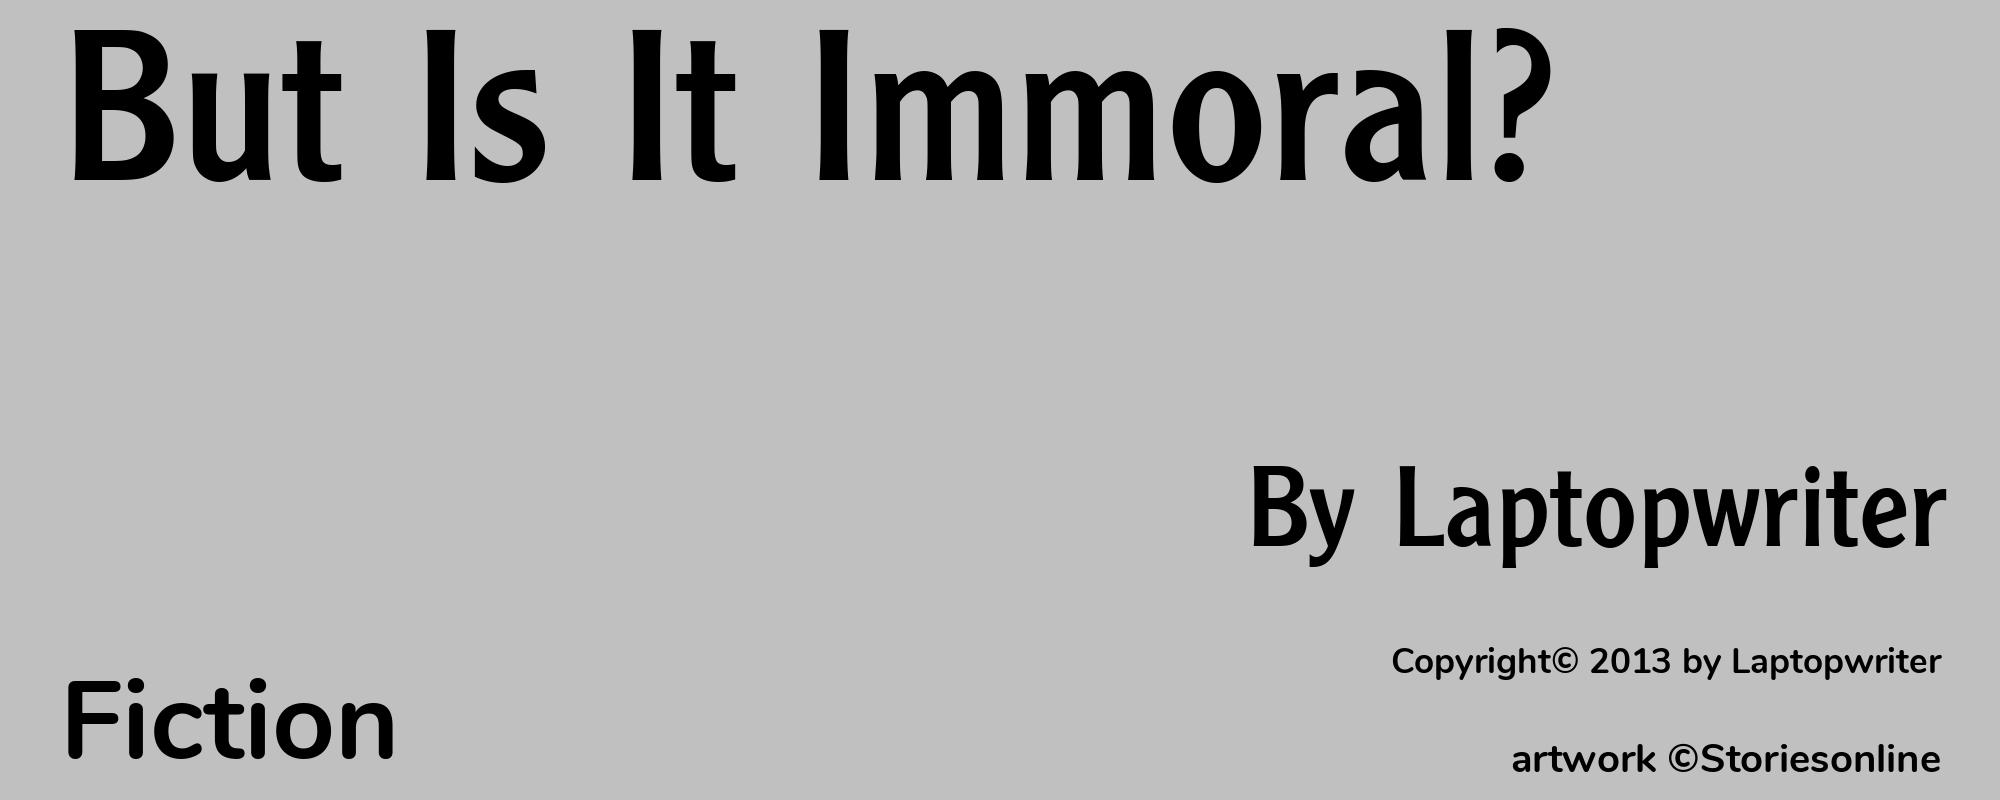 But Is It Immoral? - Cover